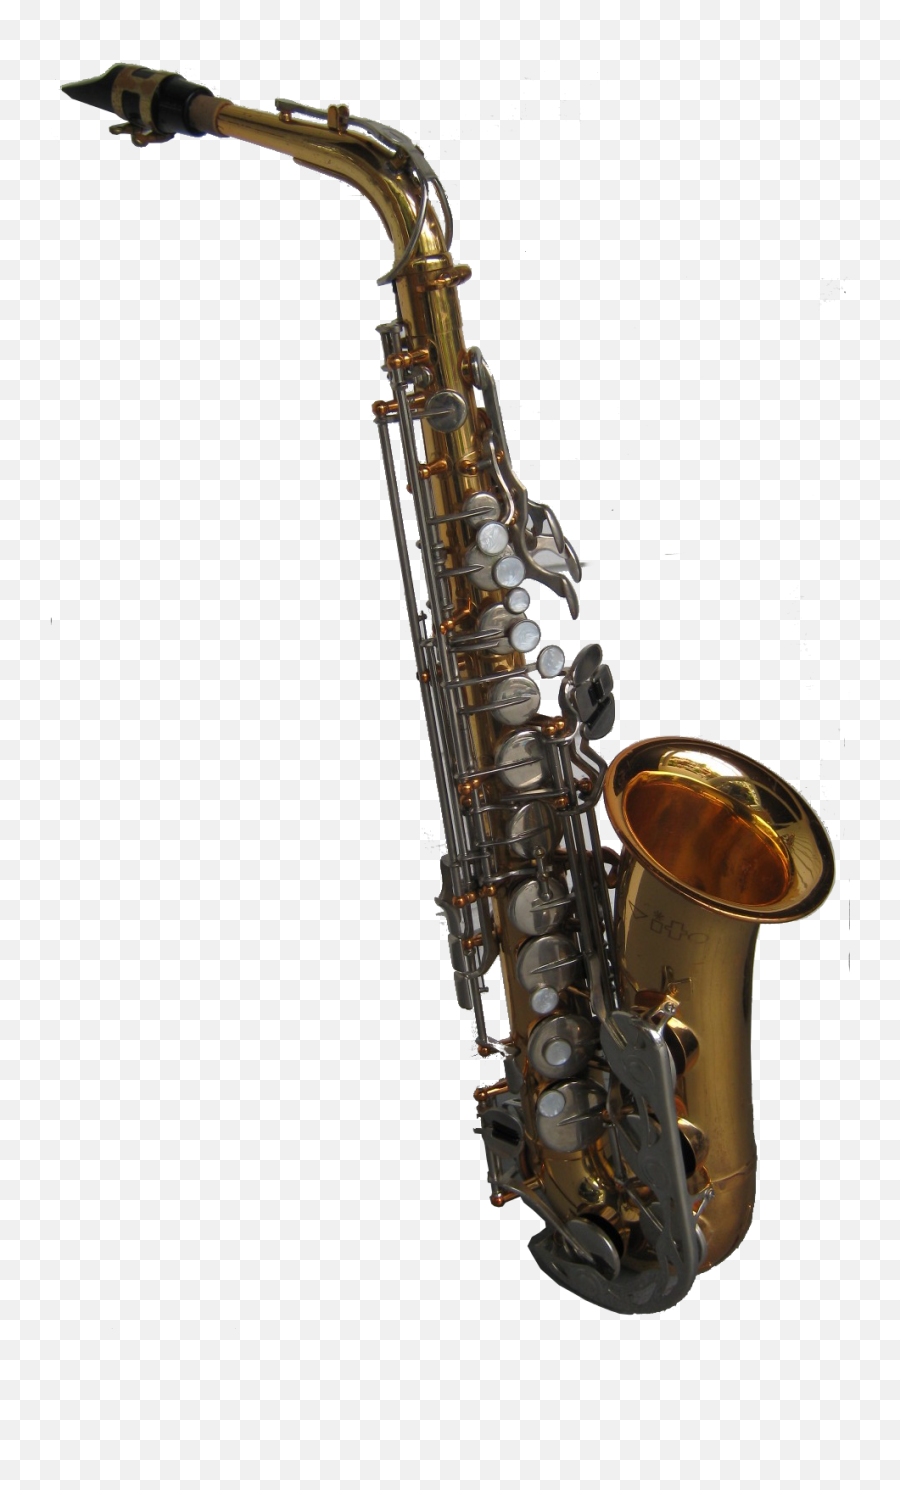 Download He Wanted To Write Songs And Play Music - Old Emoji,Saxaphone Png